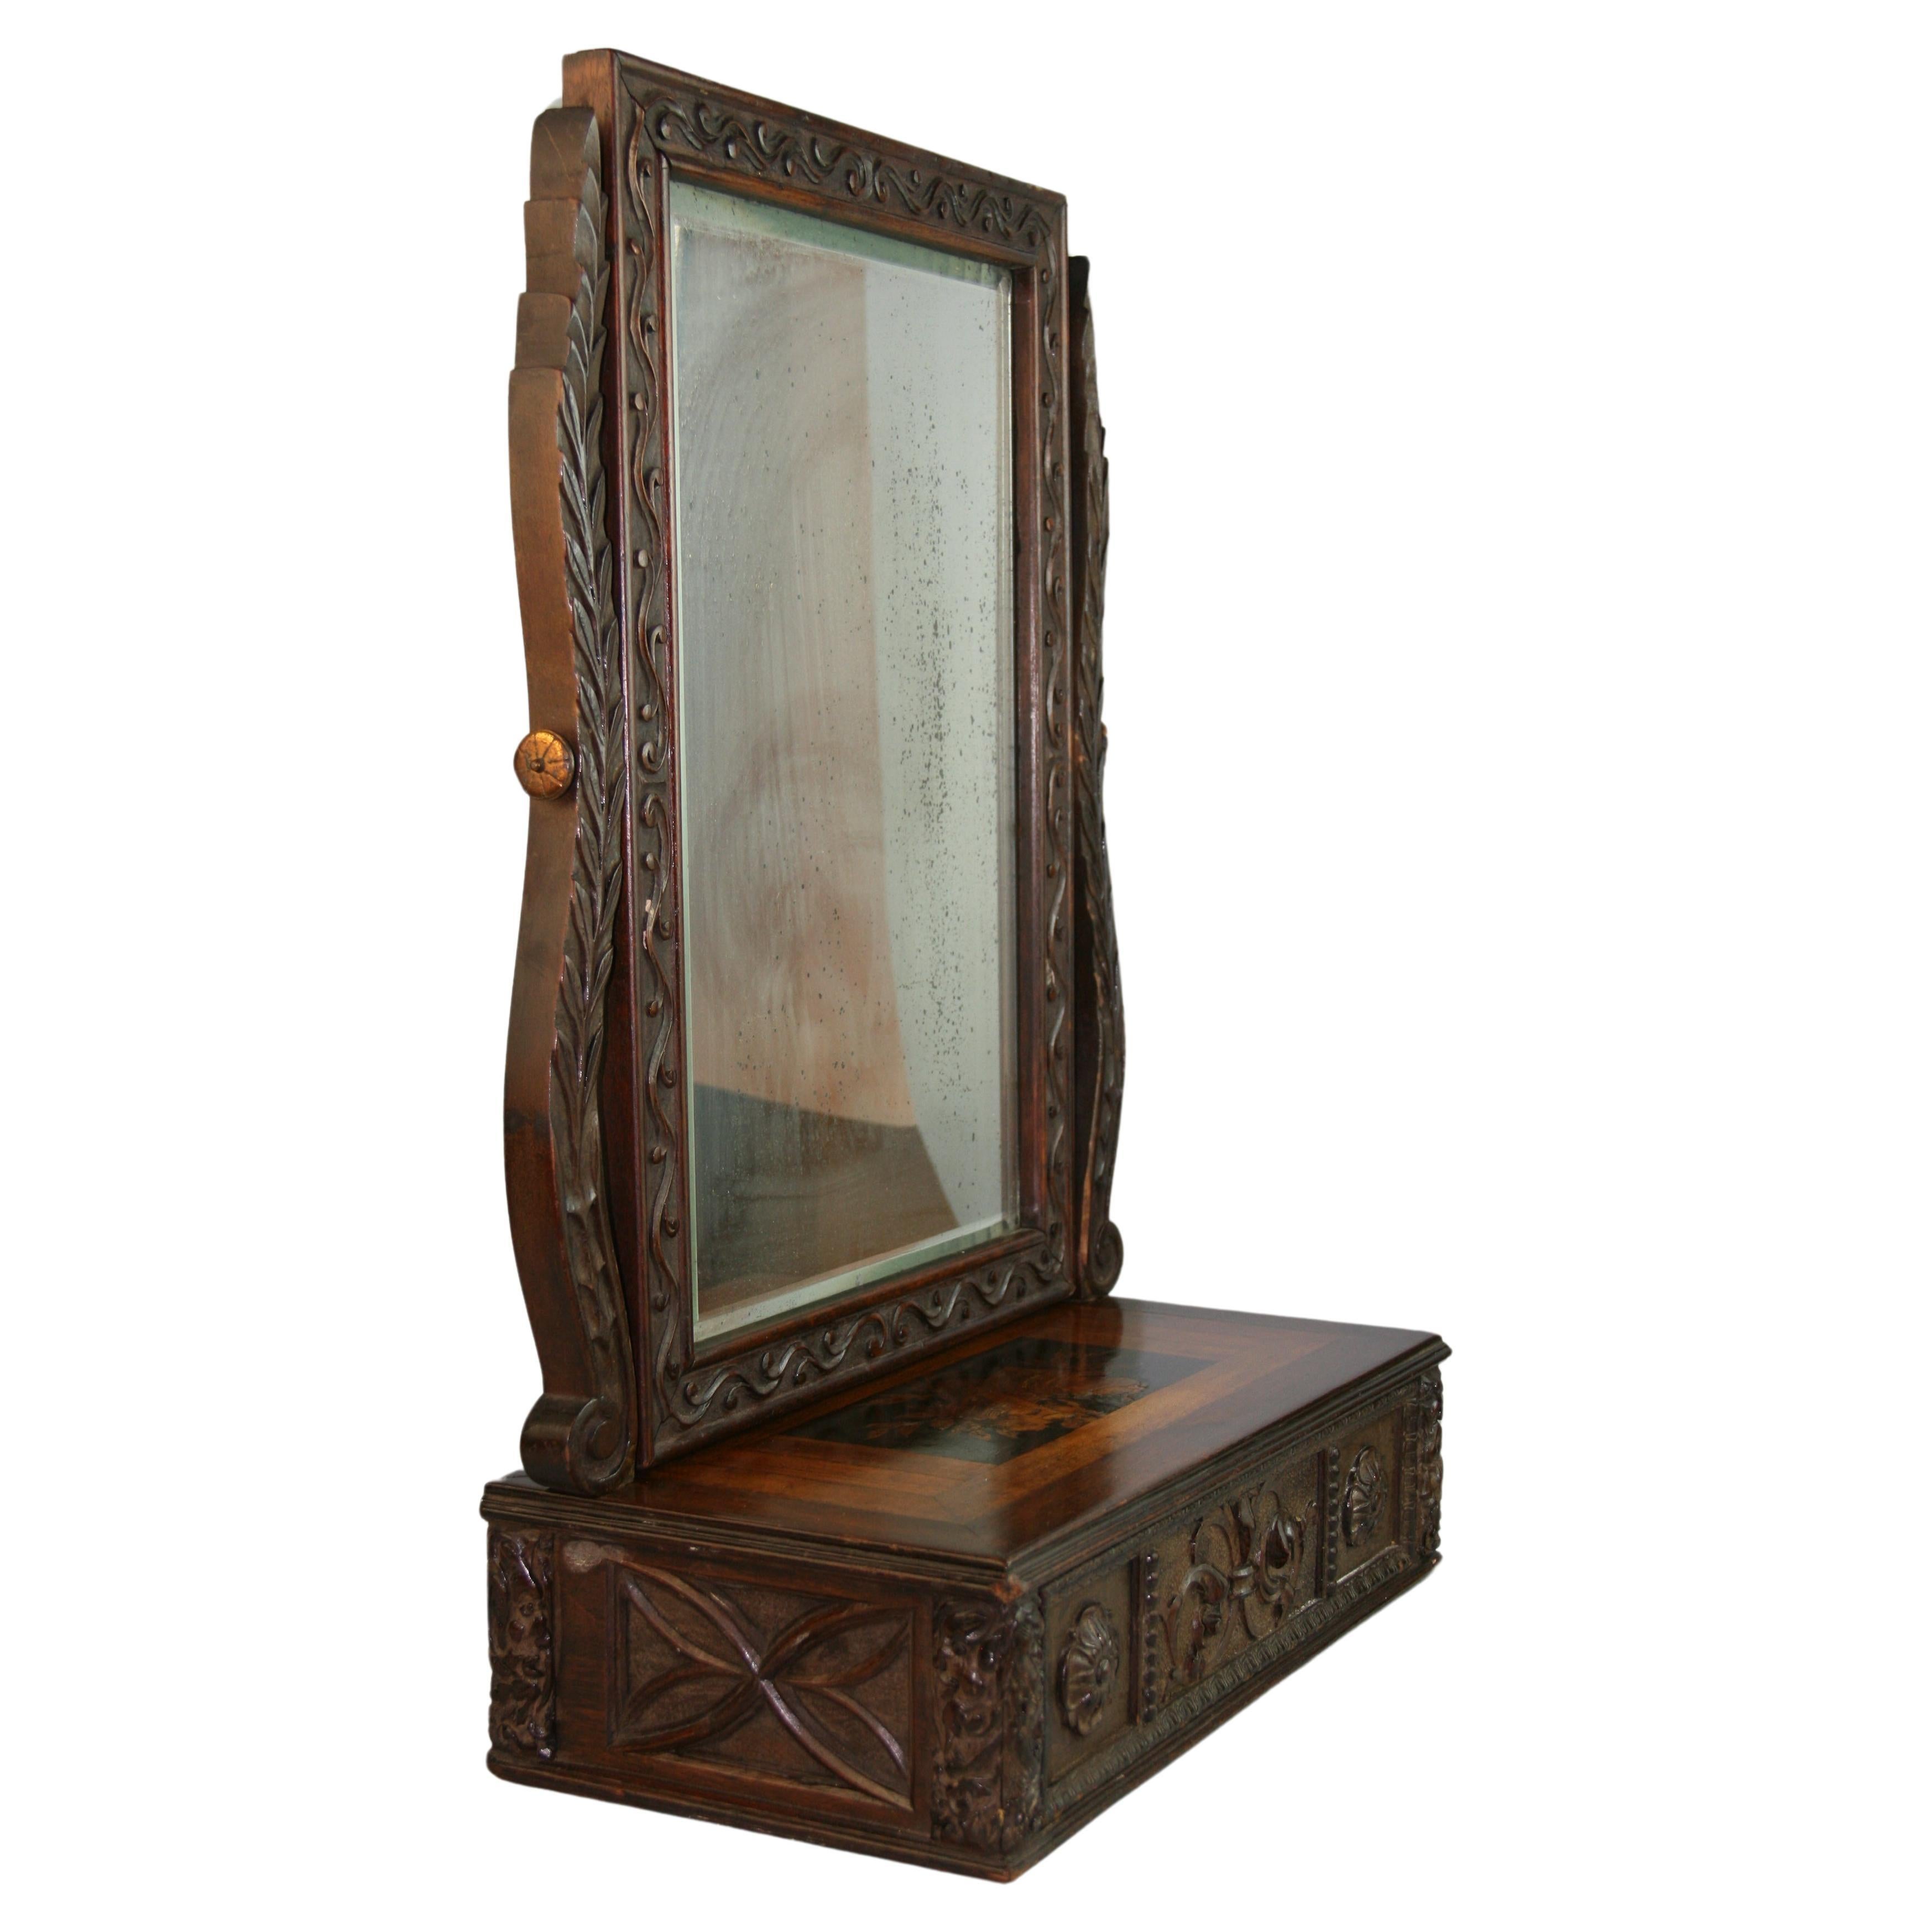 1459 Antique beveled mirror intricately carved table swing mirror with one drawer.
Marquetry on surface